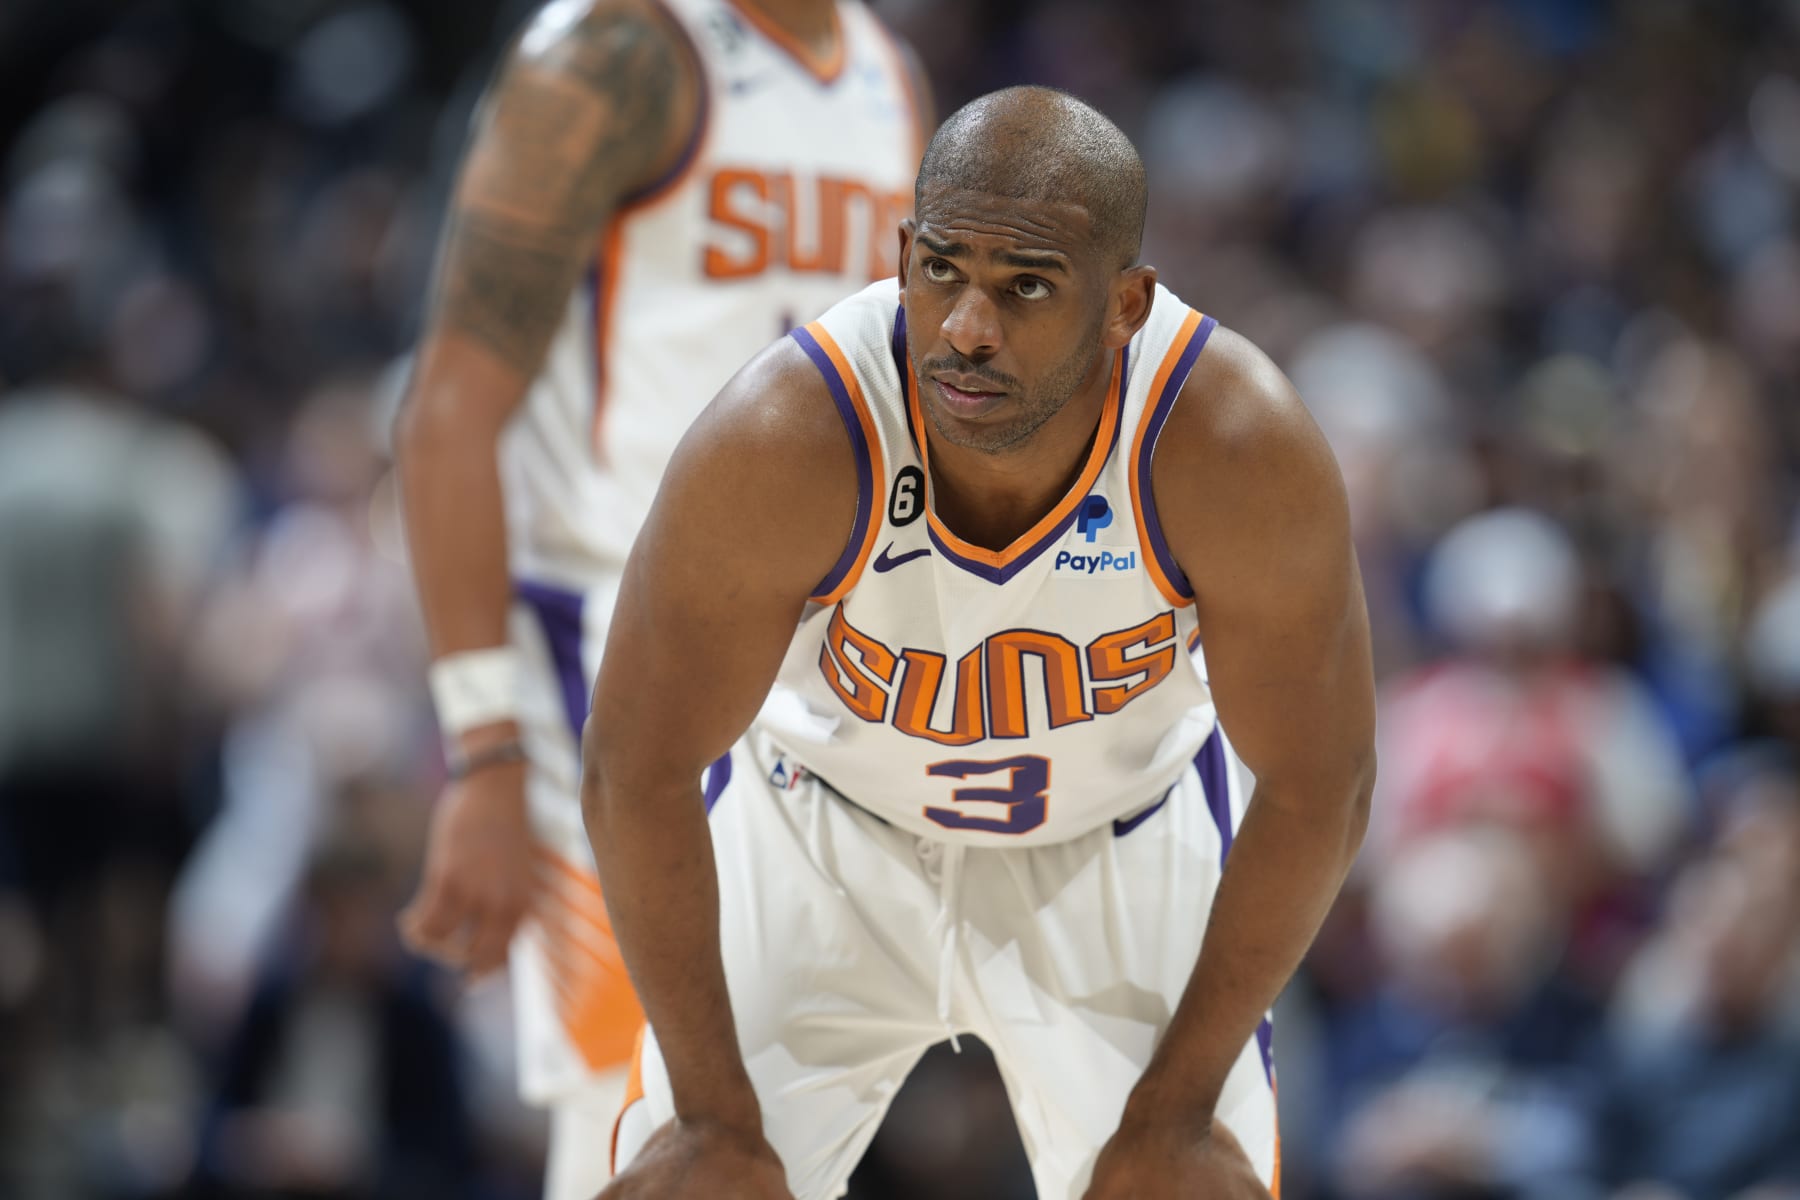 Paul back in lineup for Suns after 14-game injury absence